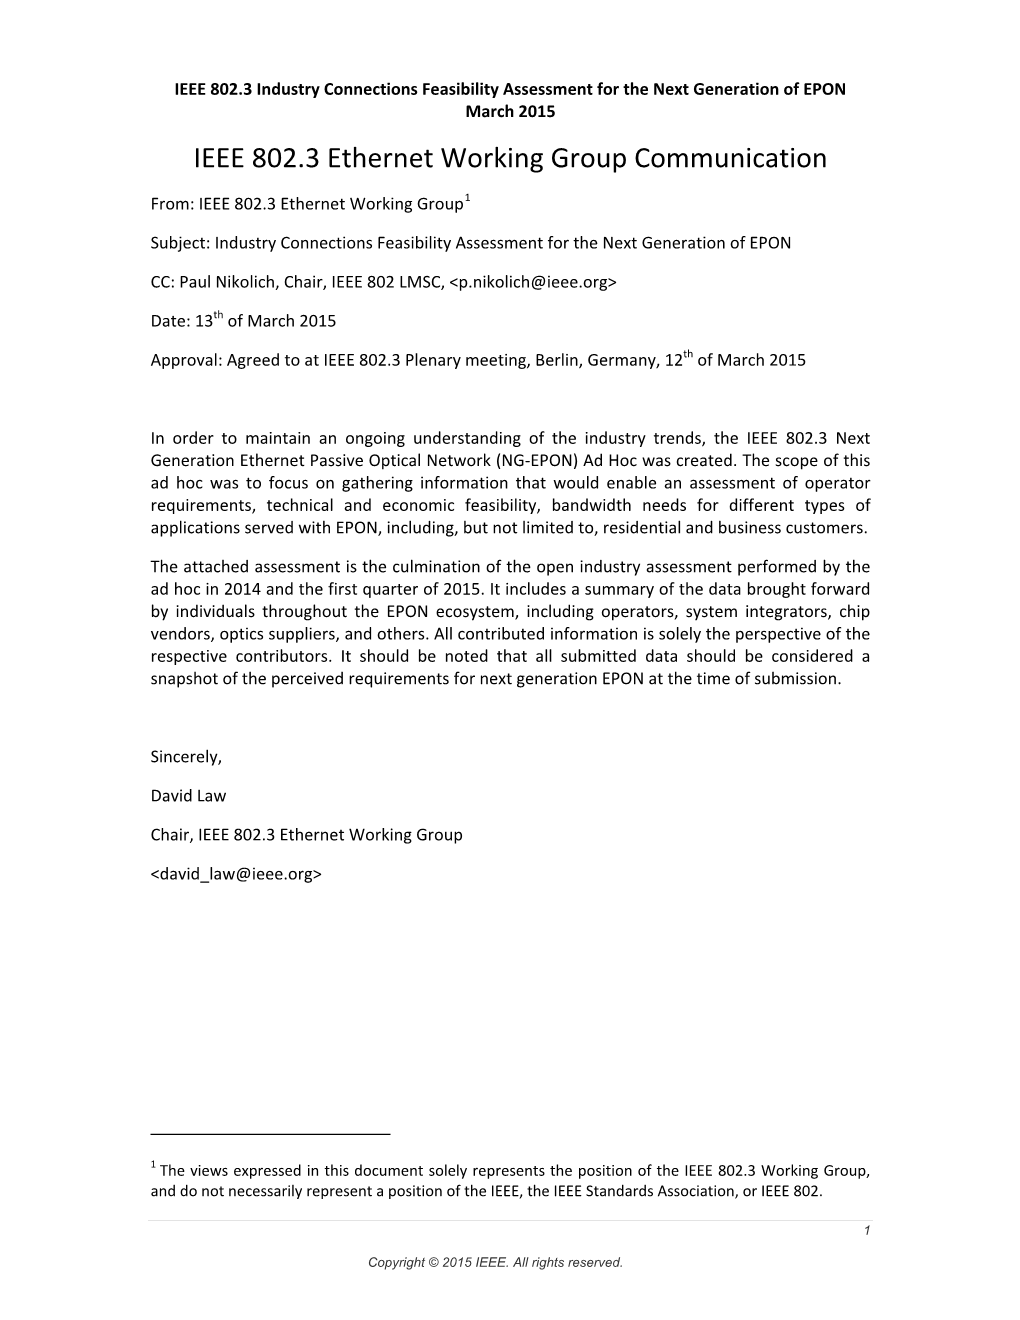 IEEE 802.3™ Industry Connections Feasibilty Assessment for the Next